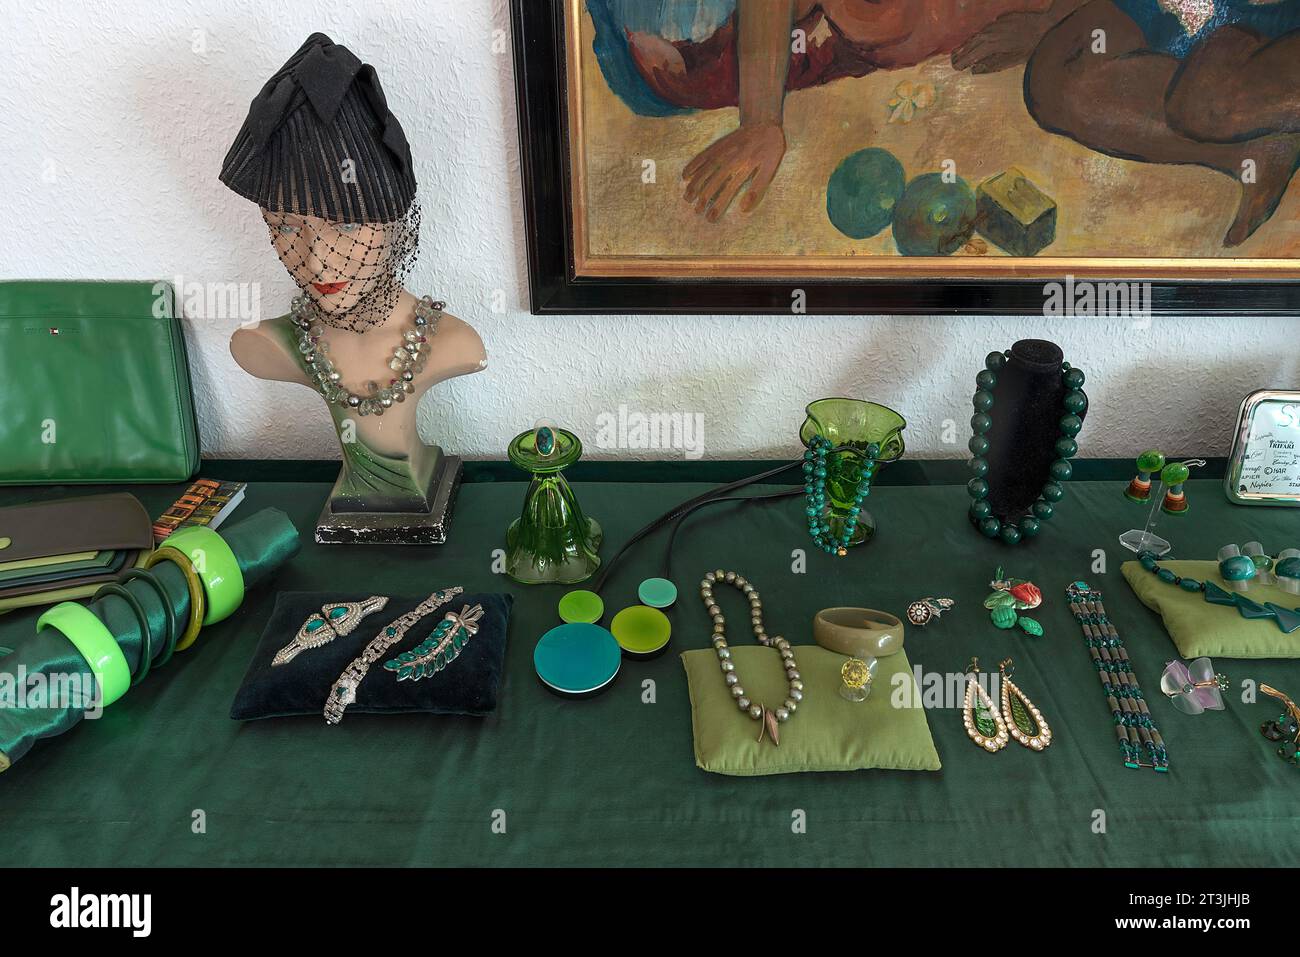 Jewellery decorated on a green cloth, Bavaria, Germany Stock Photo